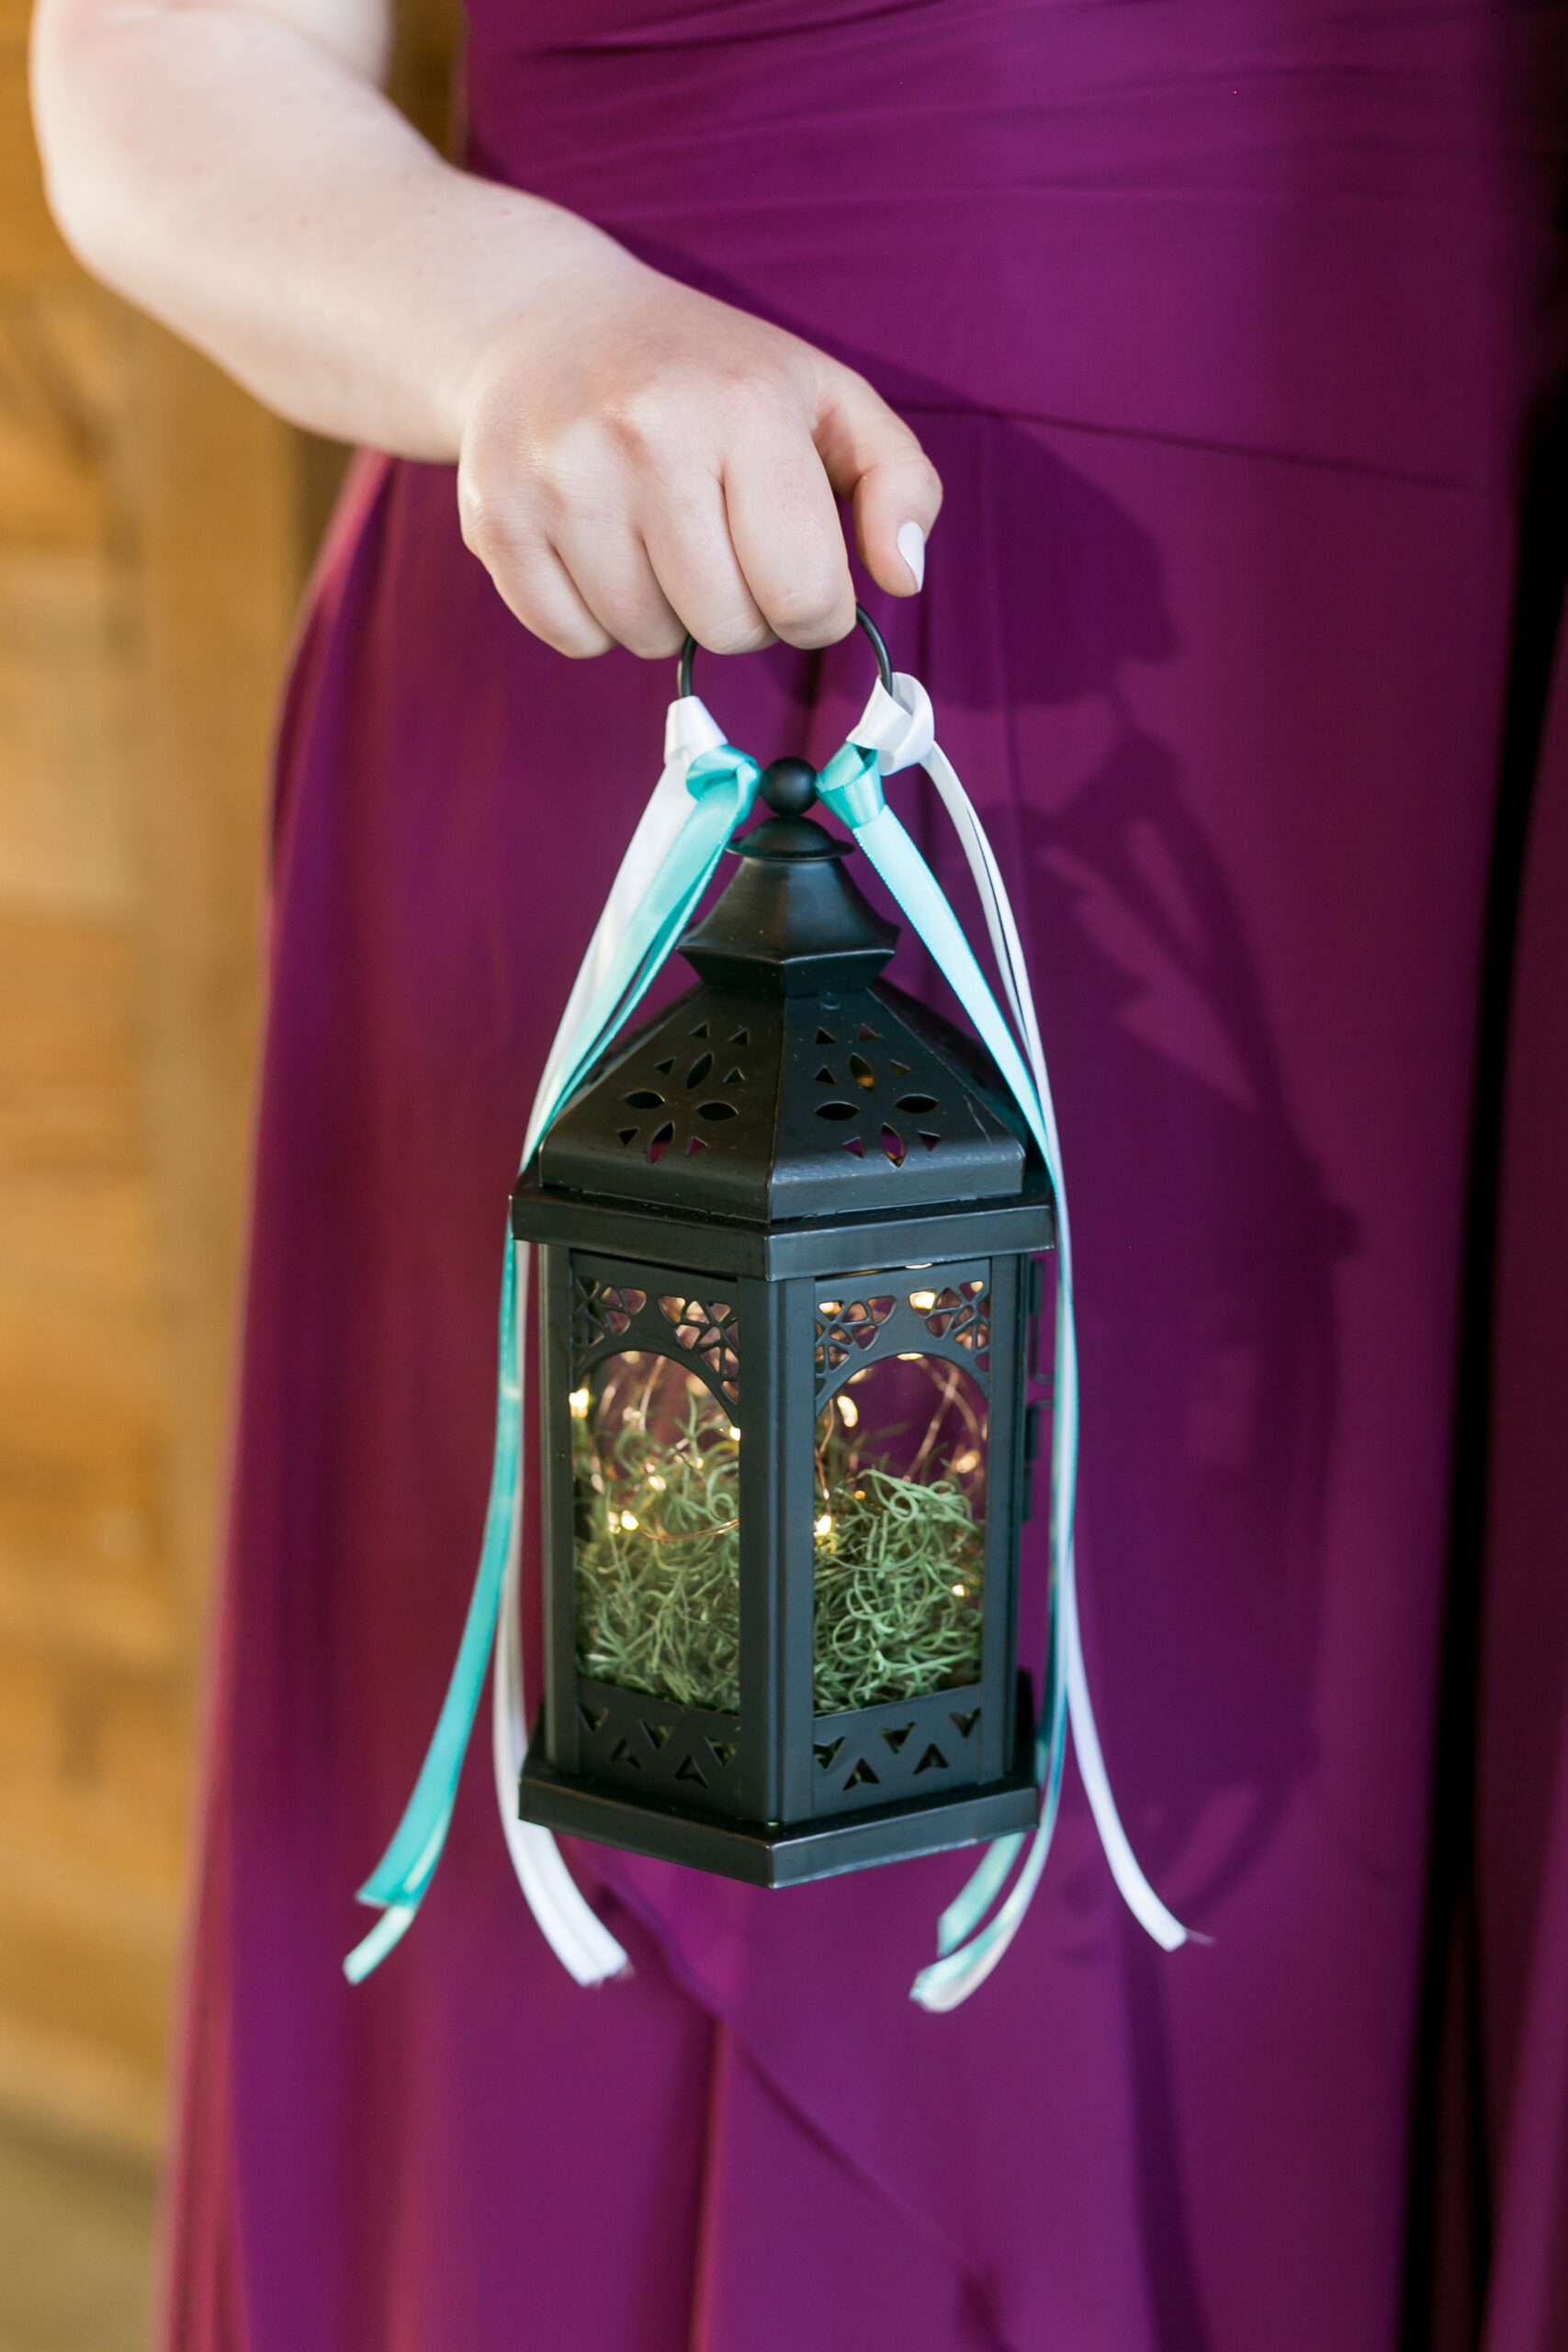 close up of a hand holding a black metal lantern. The lantern seems to contain moss and fairy lights.